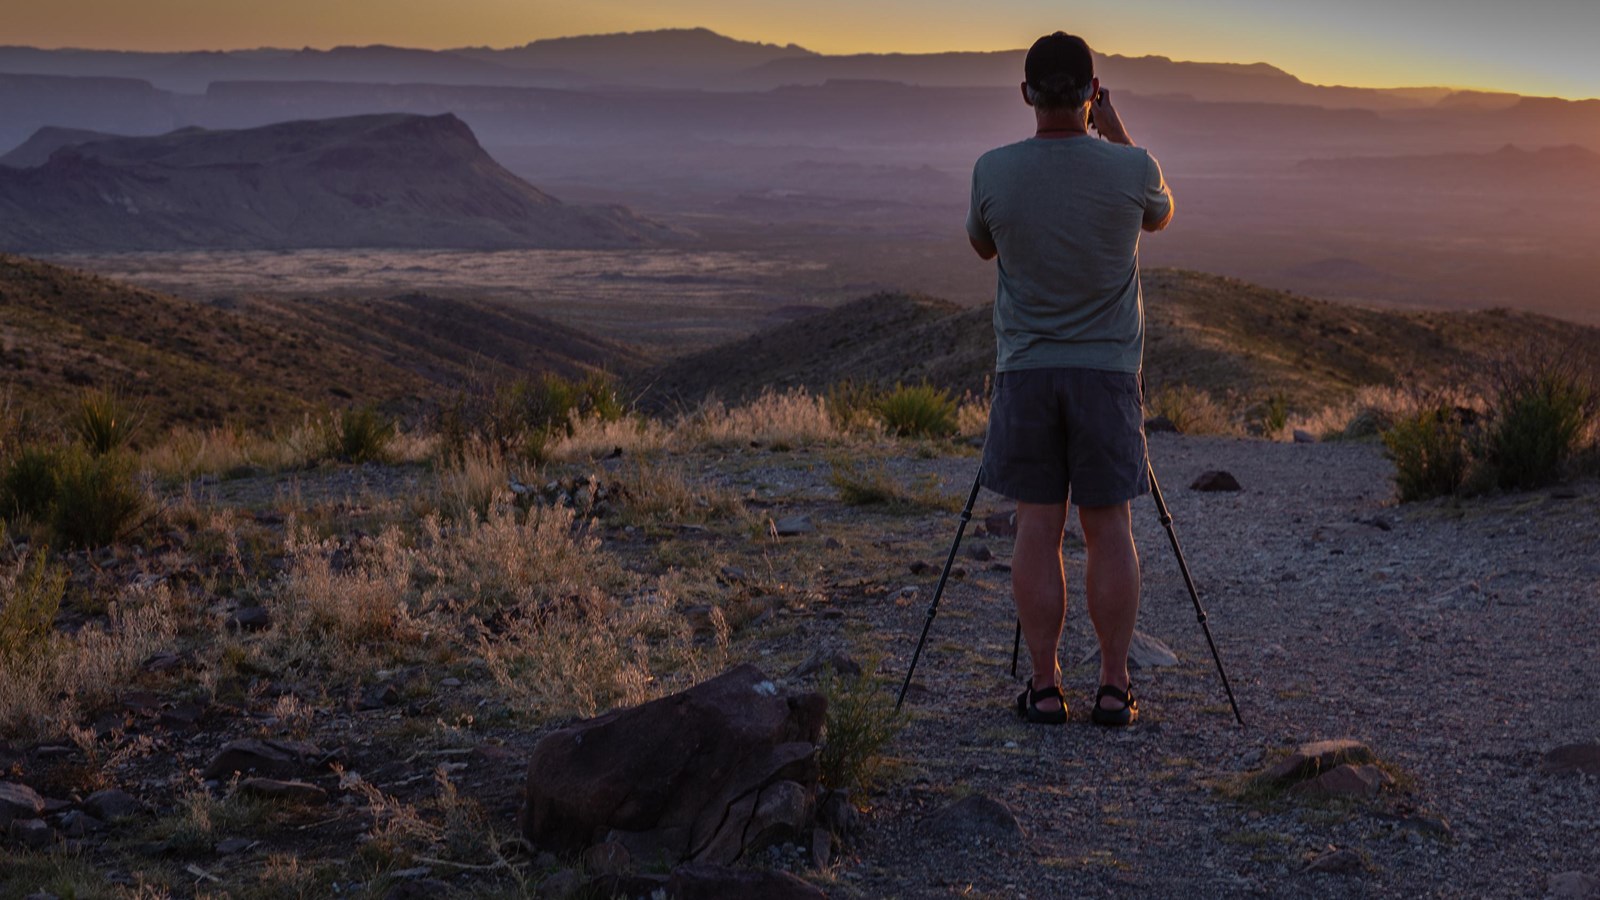 A photographer captures images of the sunset from Sotol Vista.